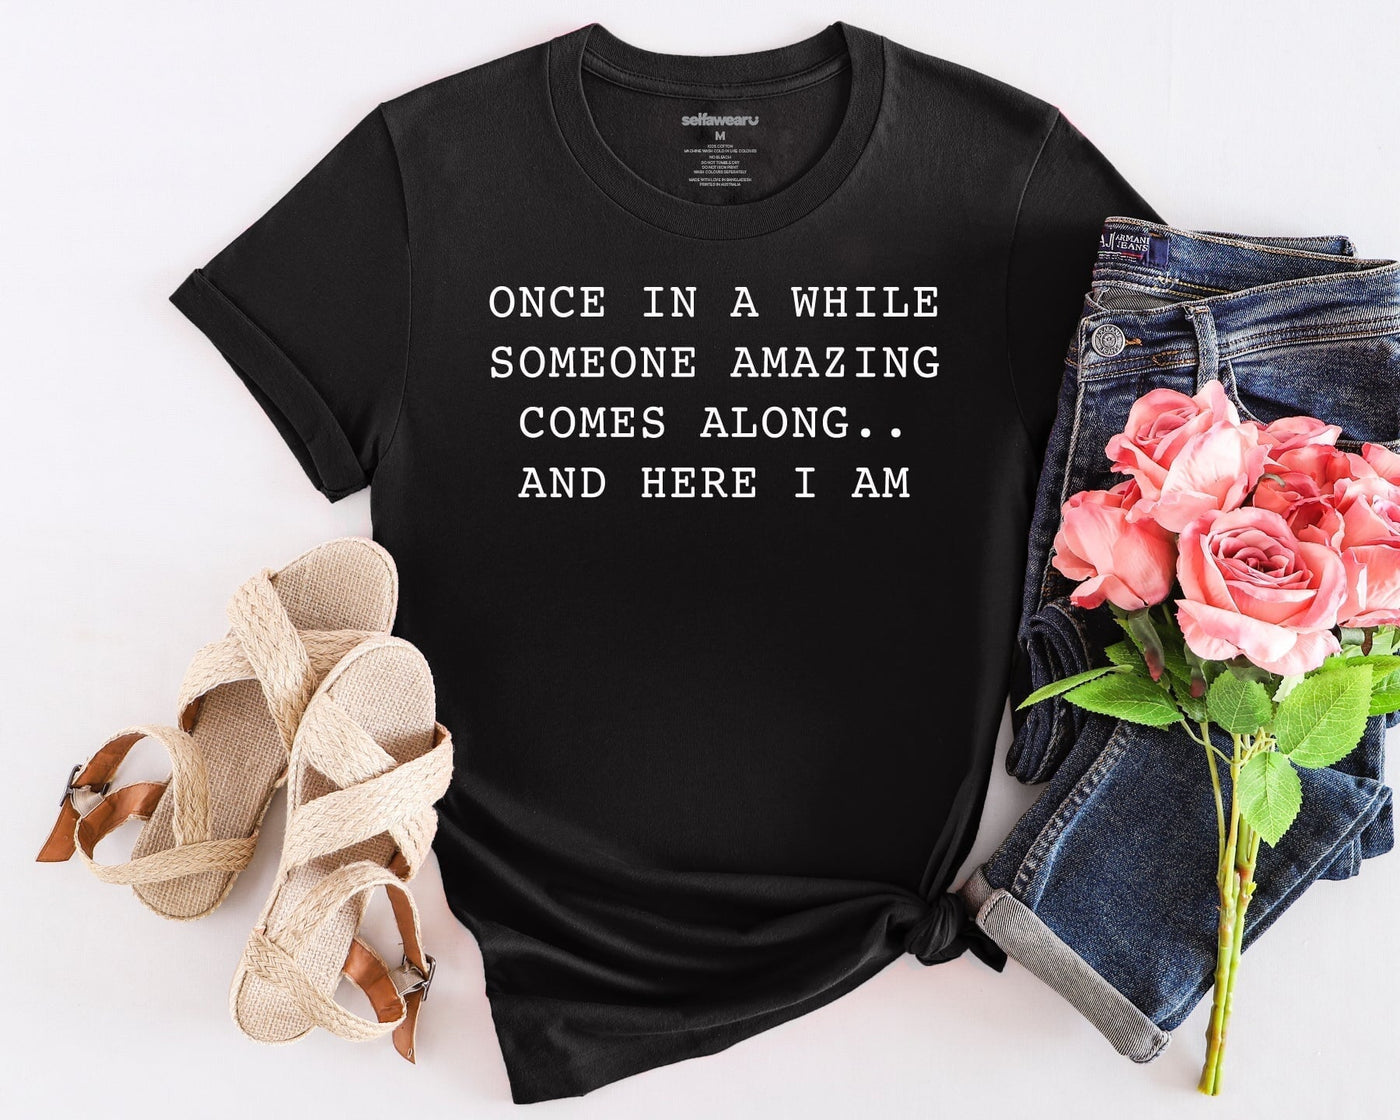 Once In A While T-Shirt Black Shirts Selfawear 